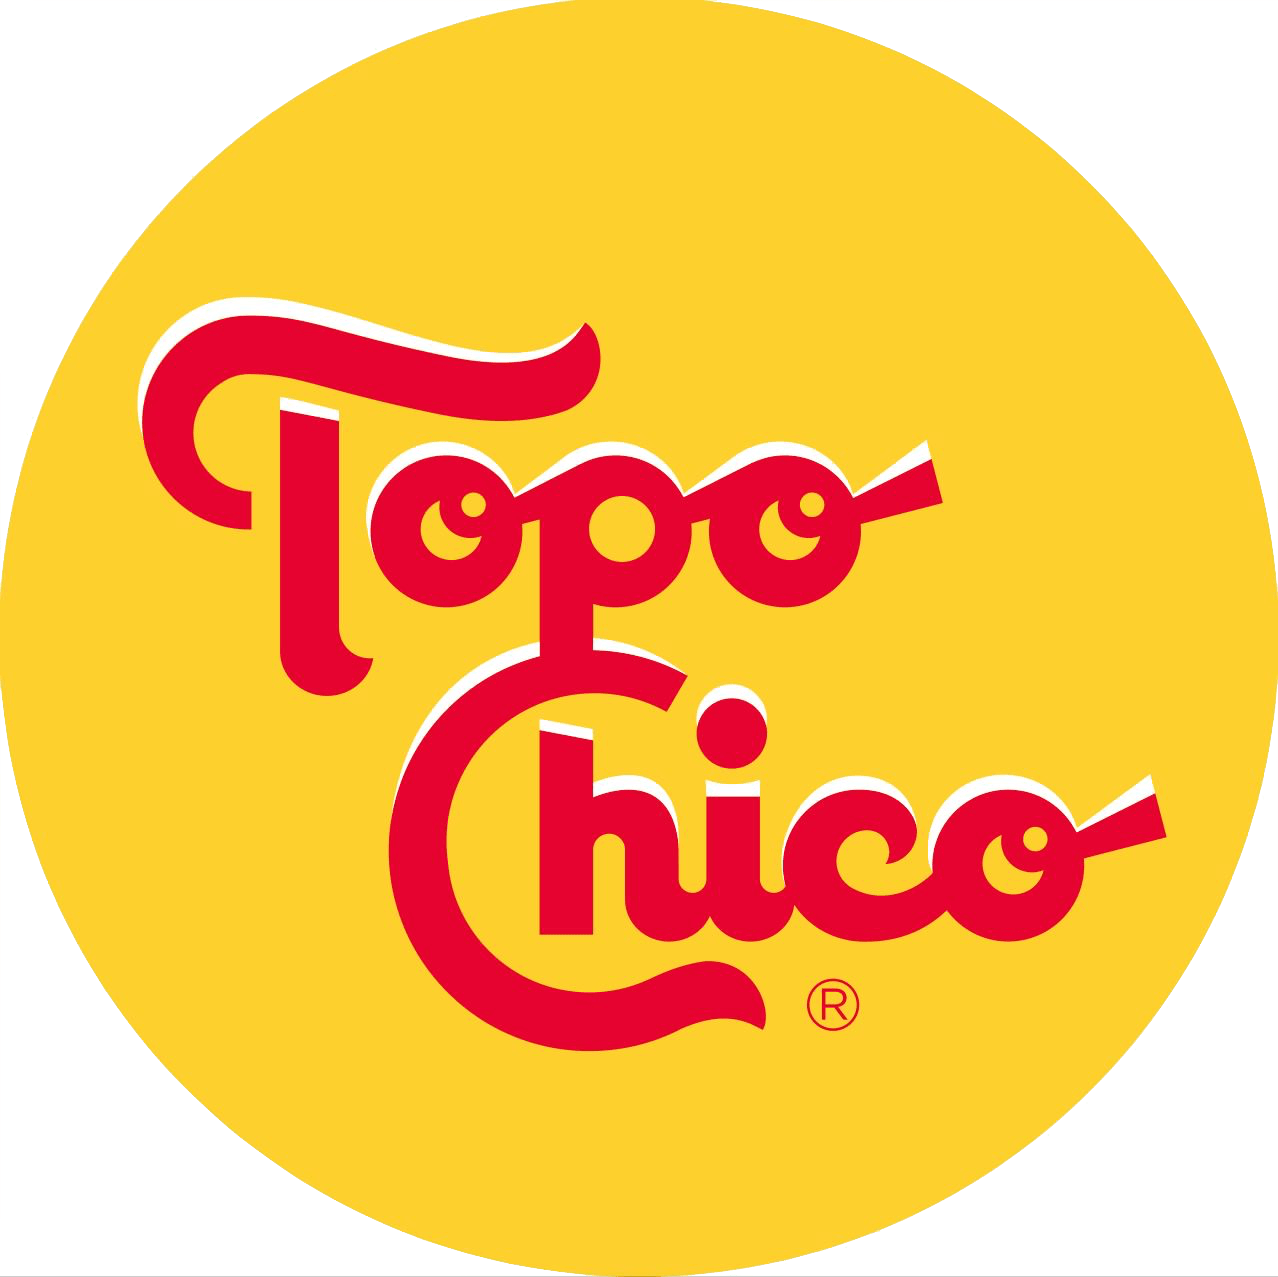 Topo Logo - New Logo and Packaging for Topo Chico